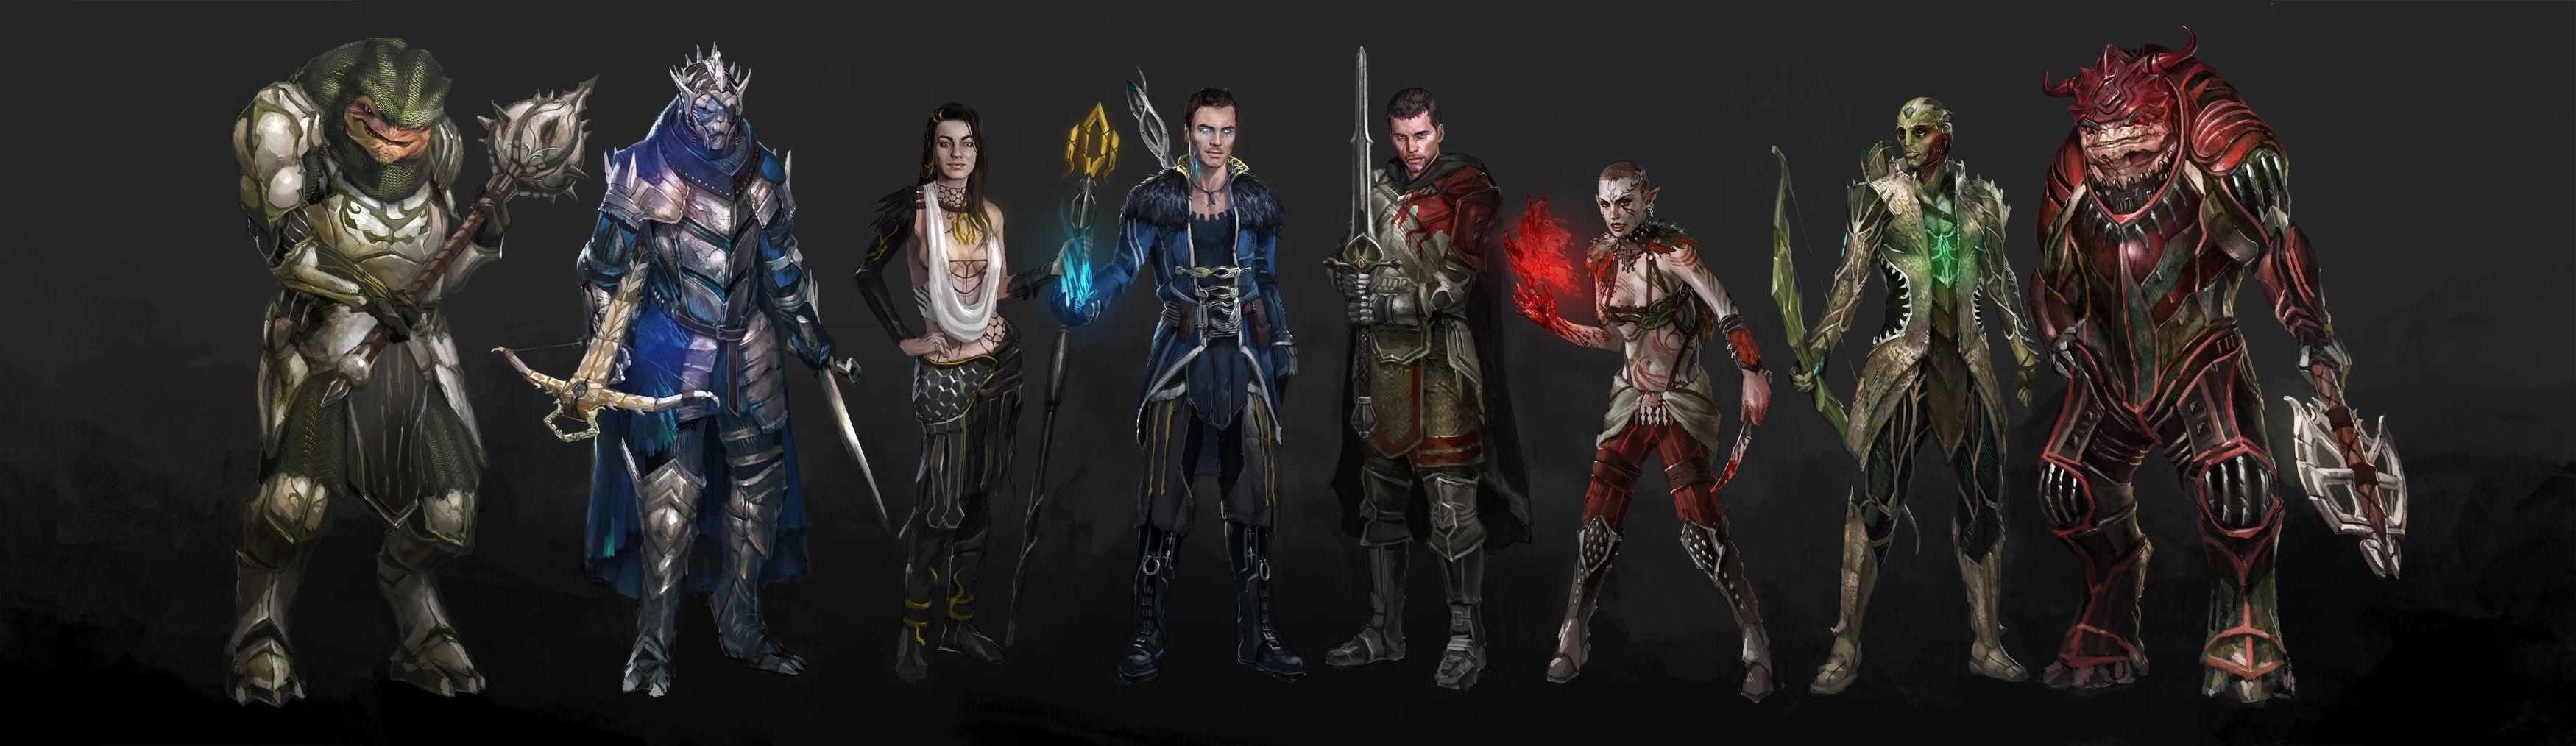 Dragon Age meets Mass Effect in this fan